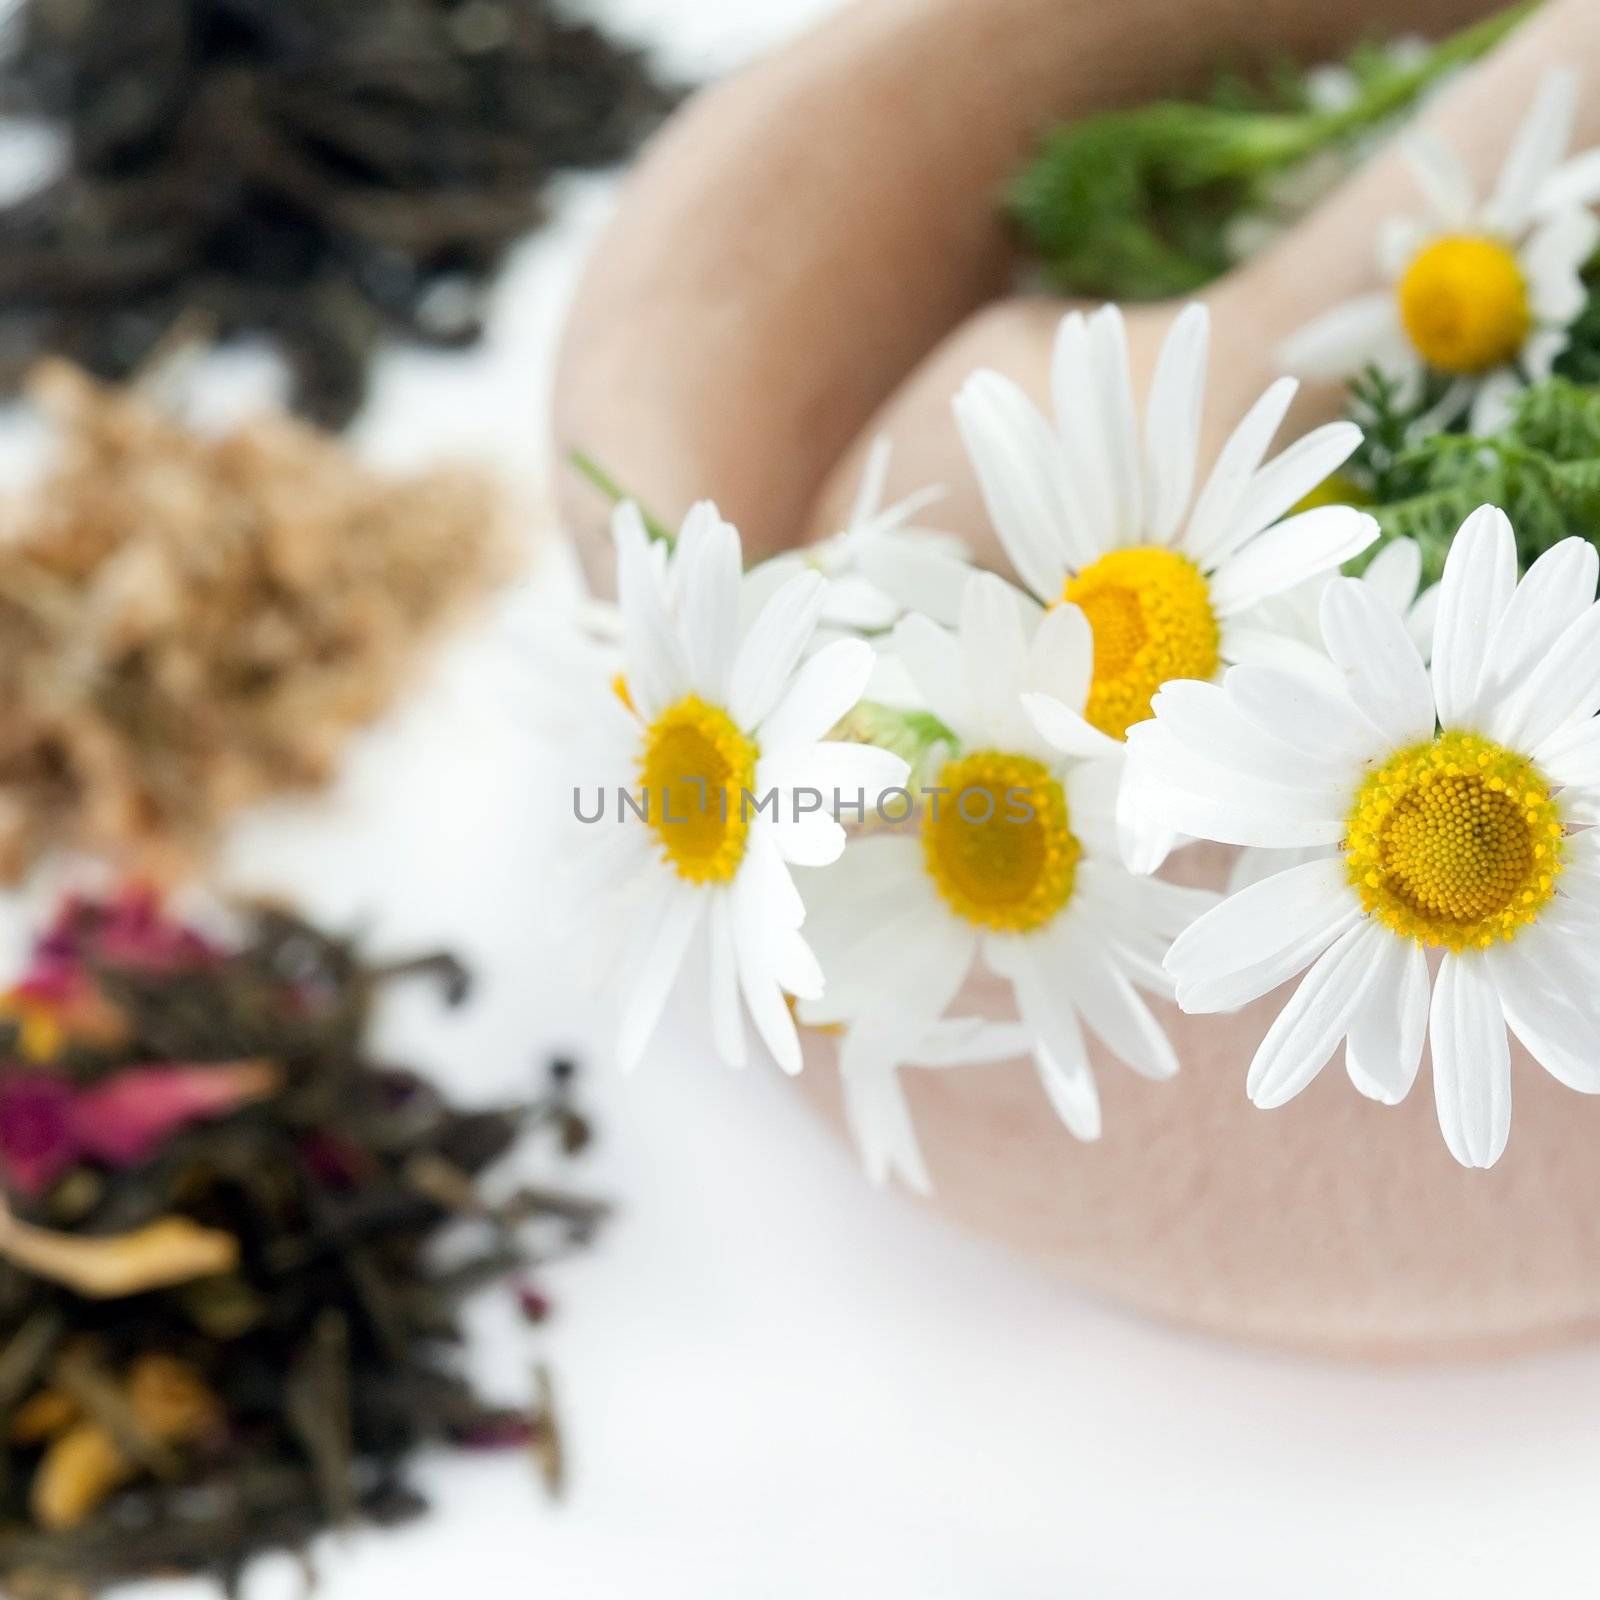 An image of beautiful white flowers and tea